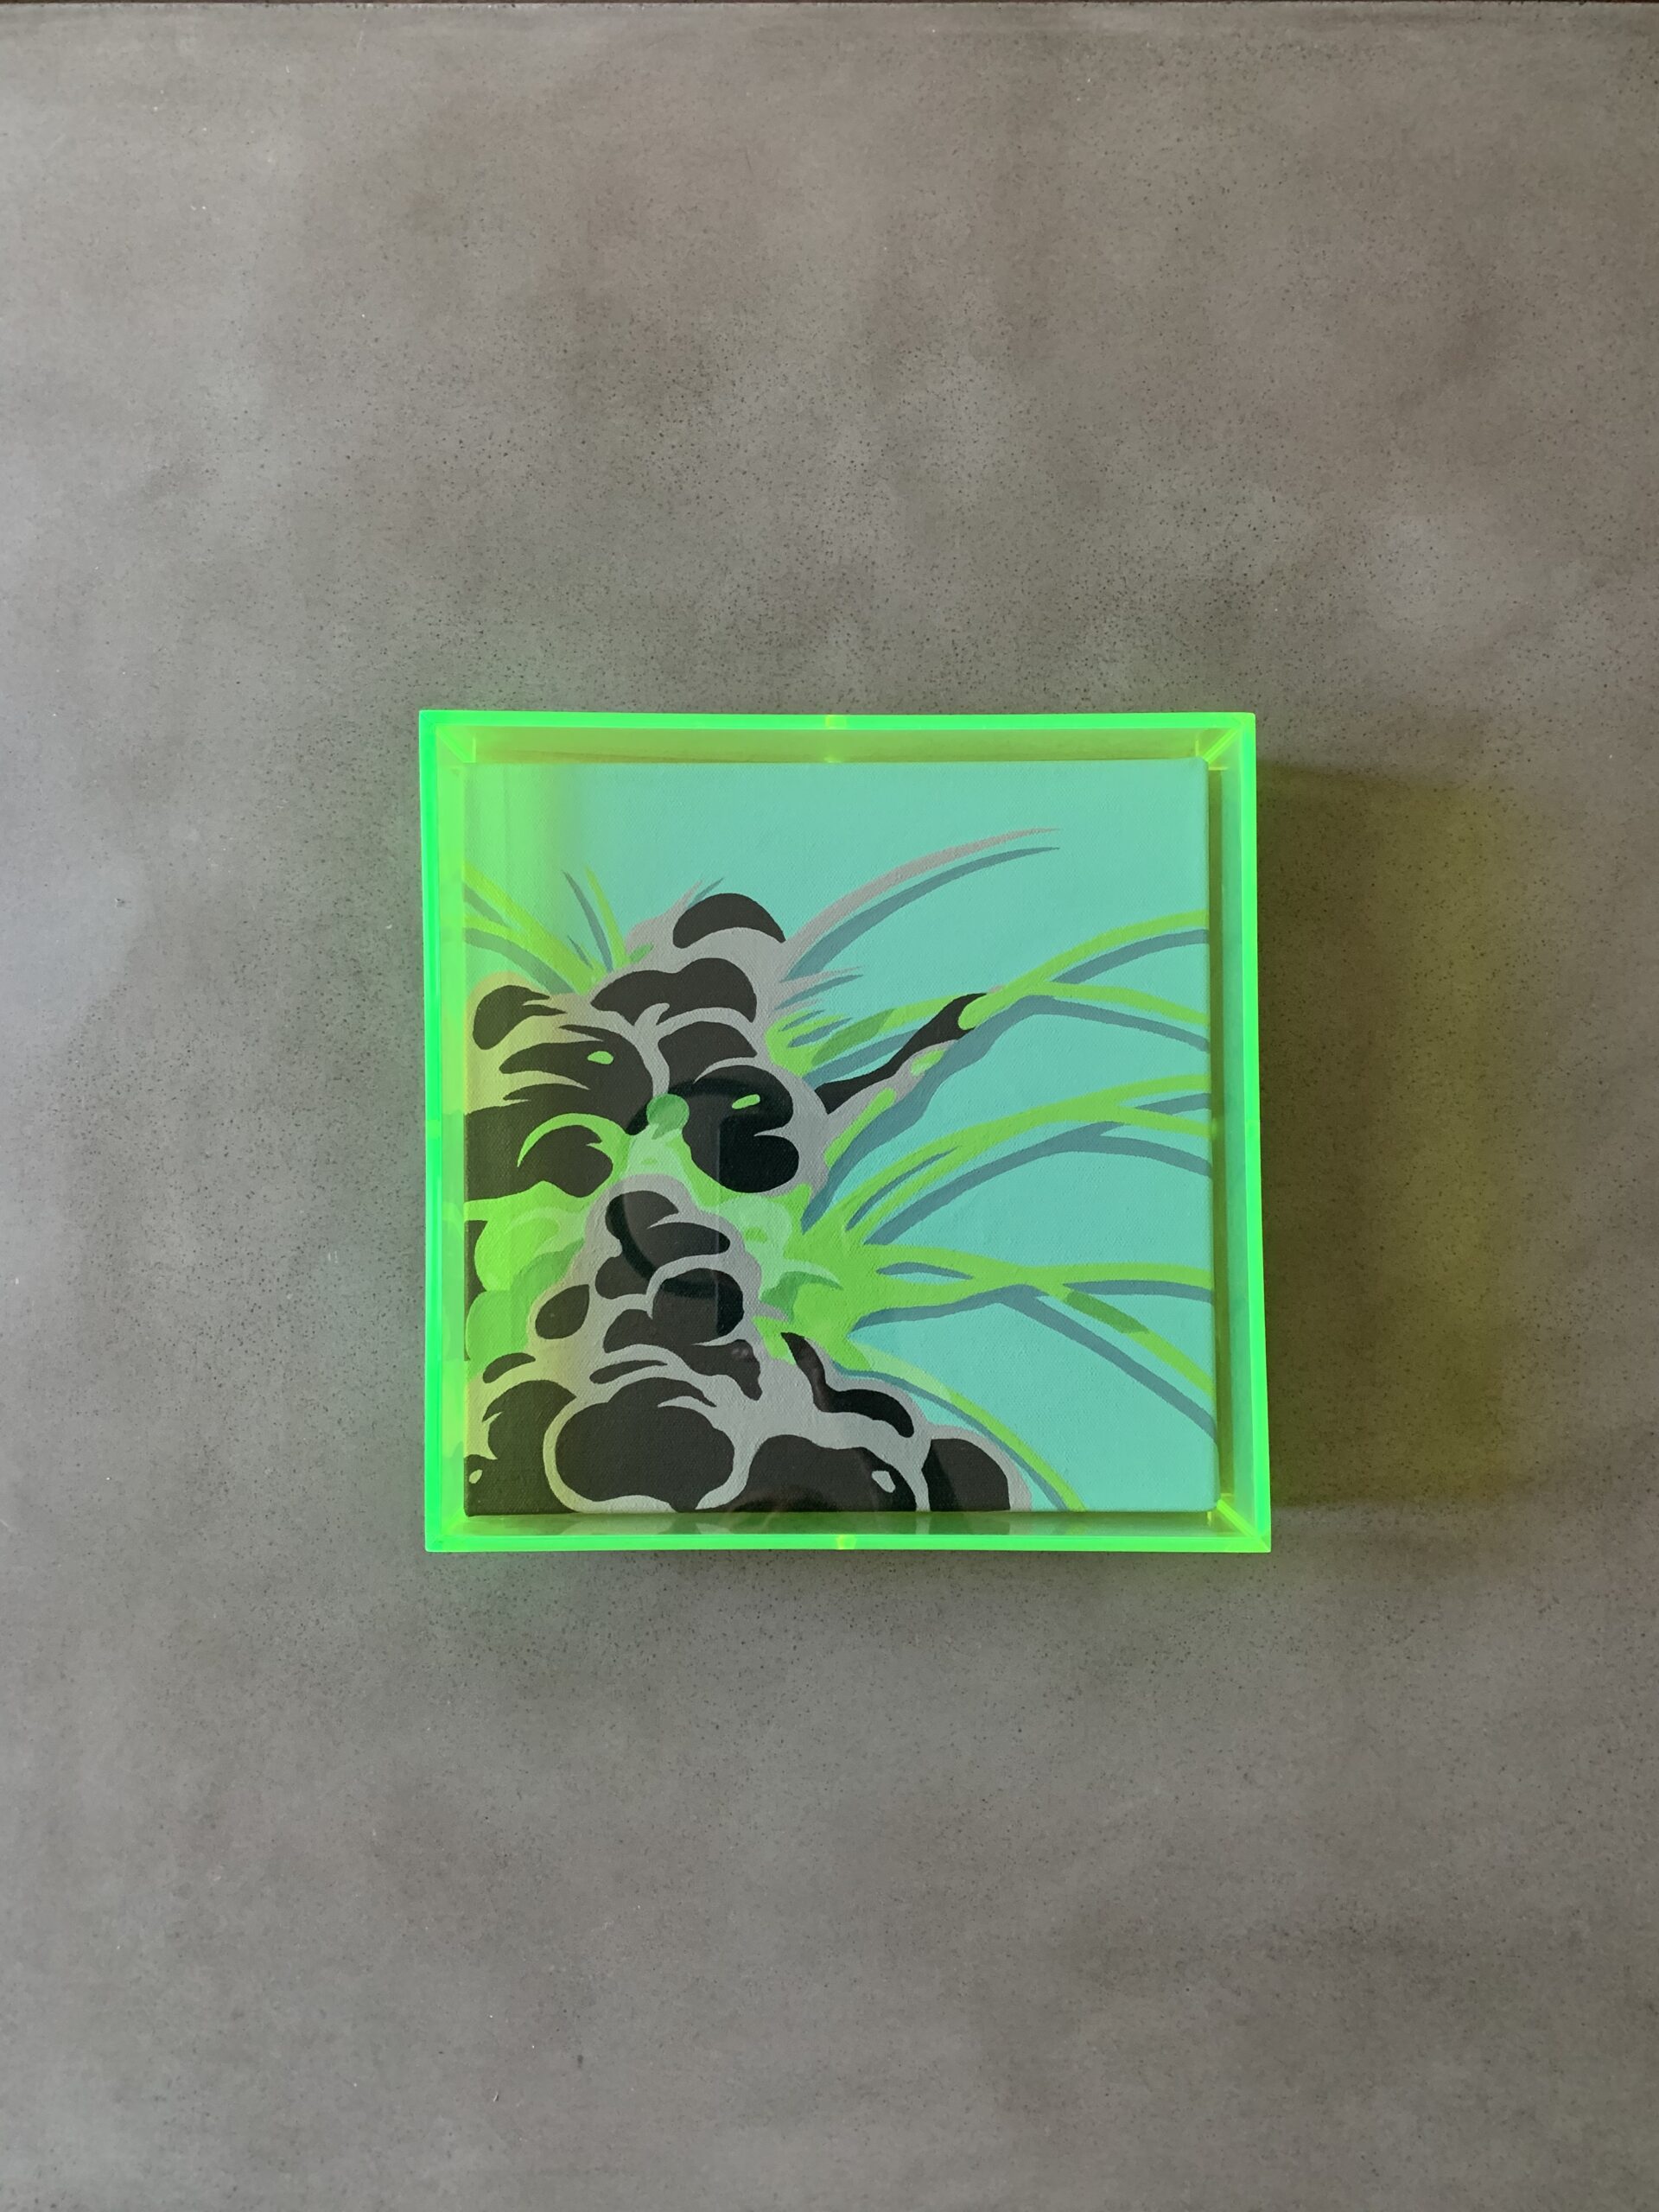 'Up in Smoke' 12x12' Gallery Wrapped Canvas. Acrylic paint & acrylic neon custom frame. 2020.